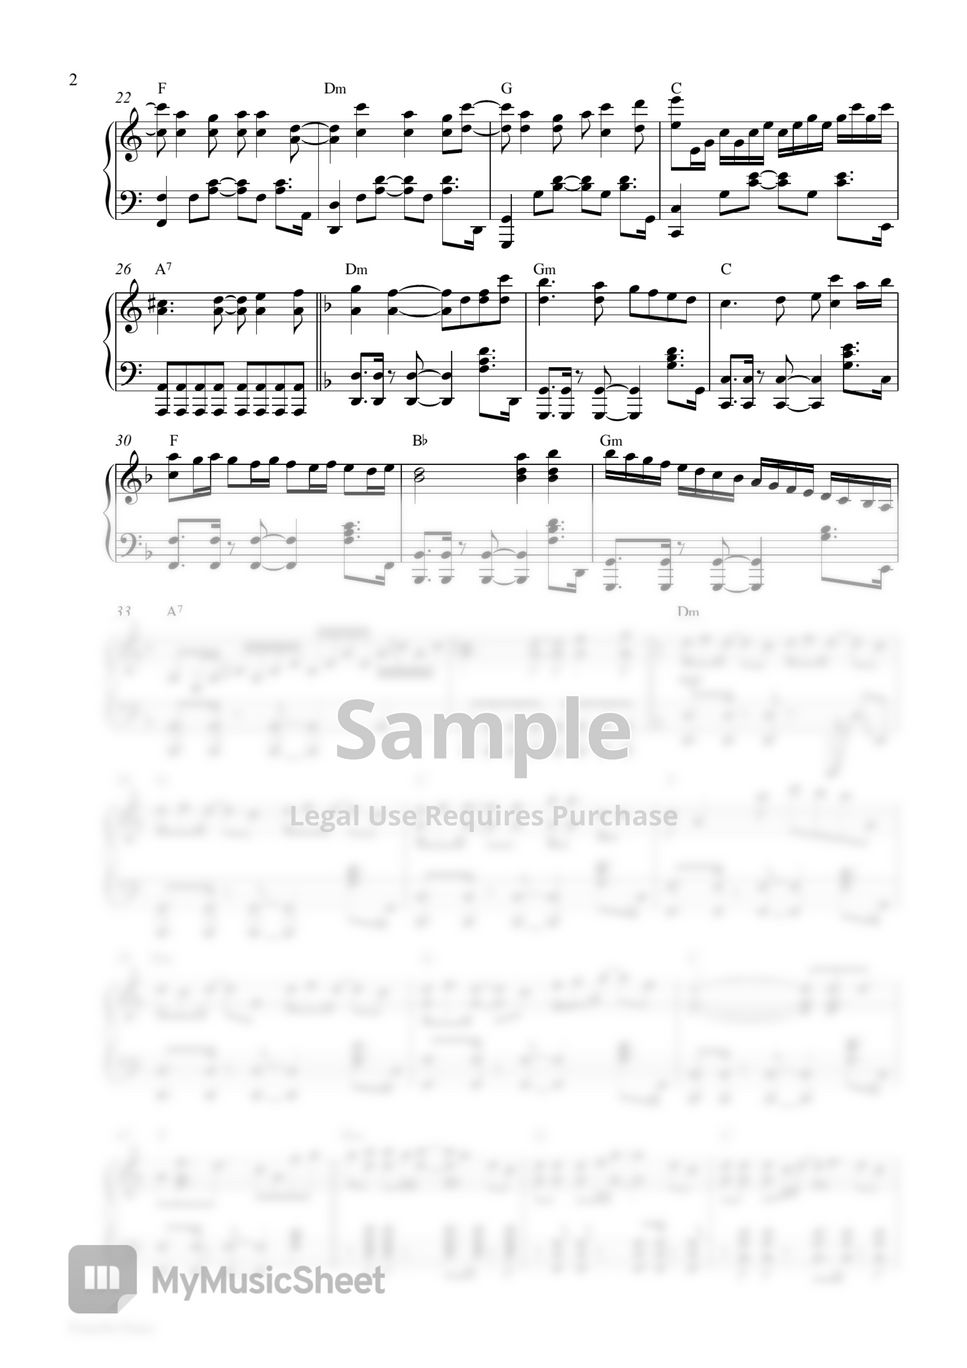 IVE - After LIKE (Piano Sheet) by Pianella Piano